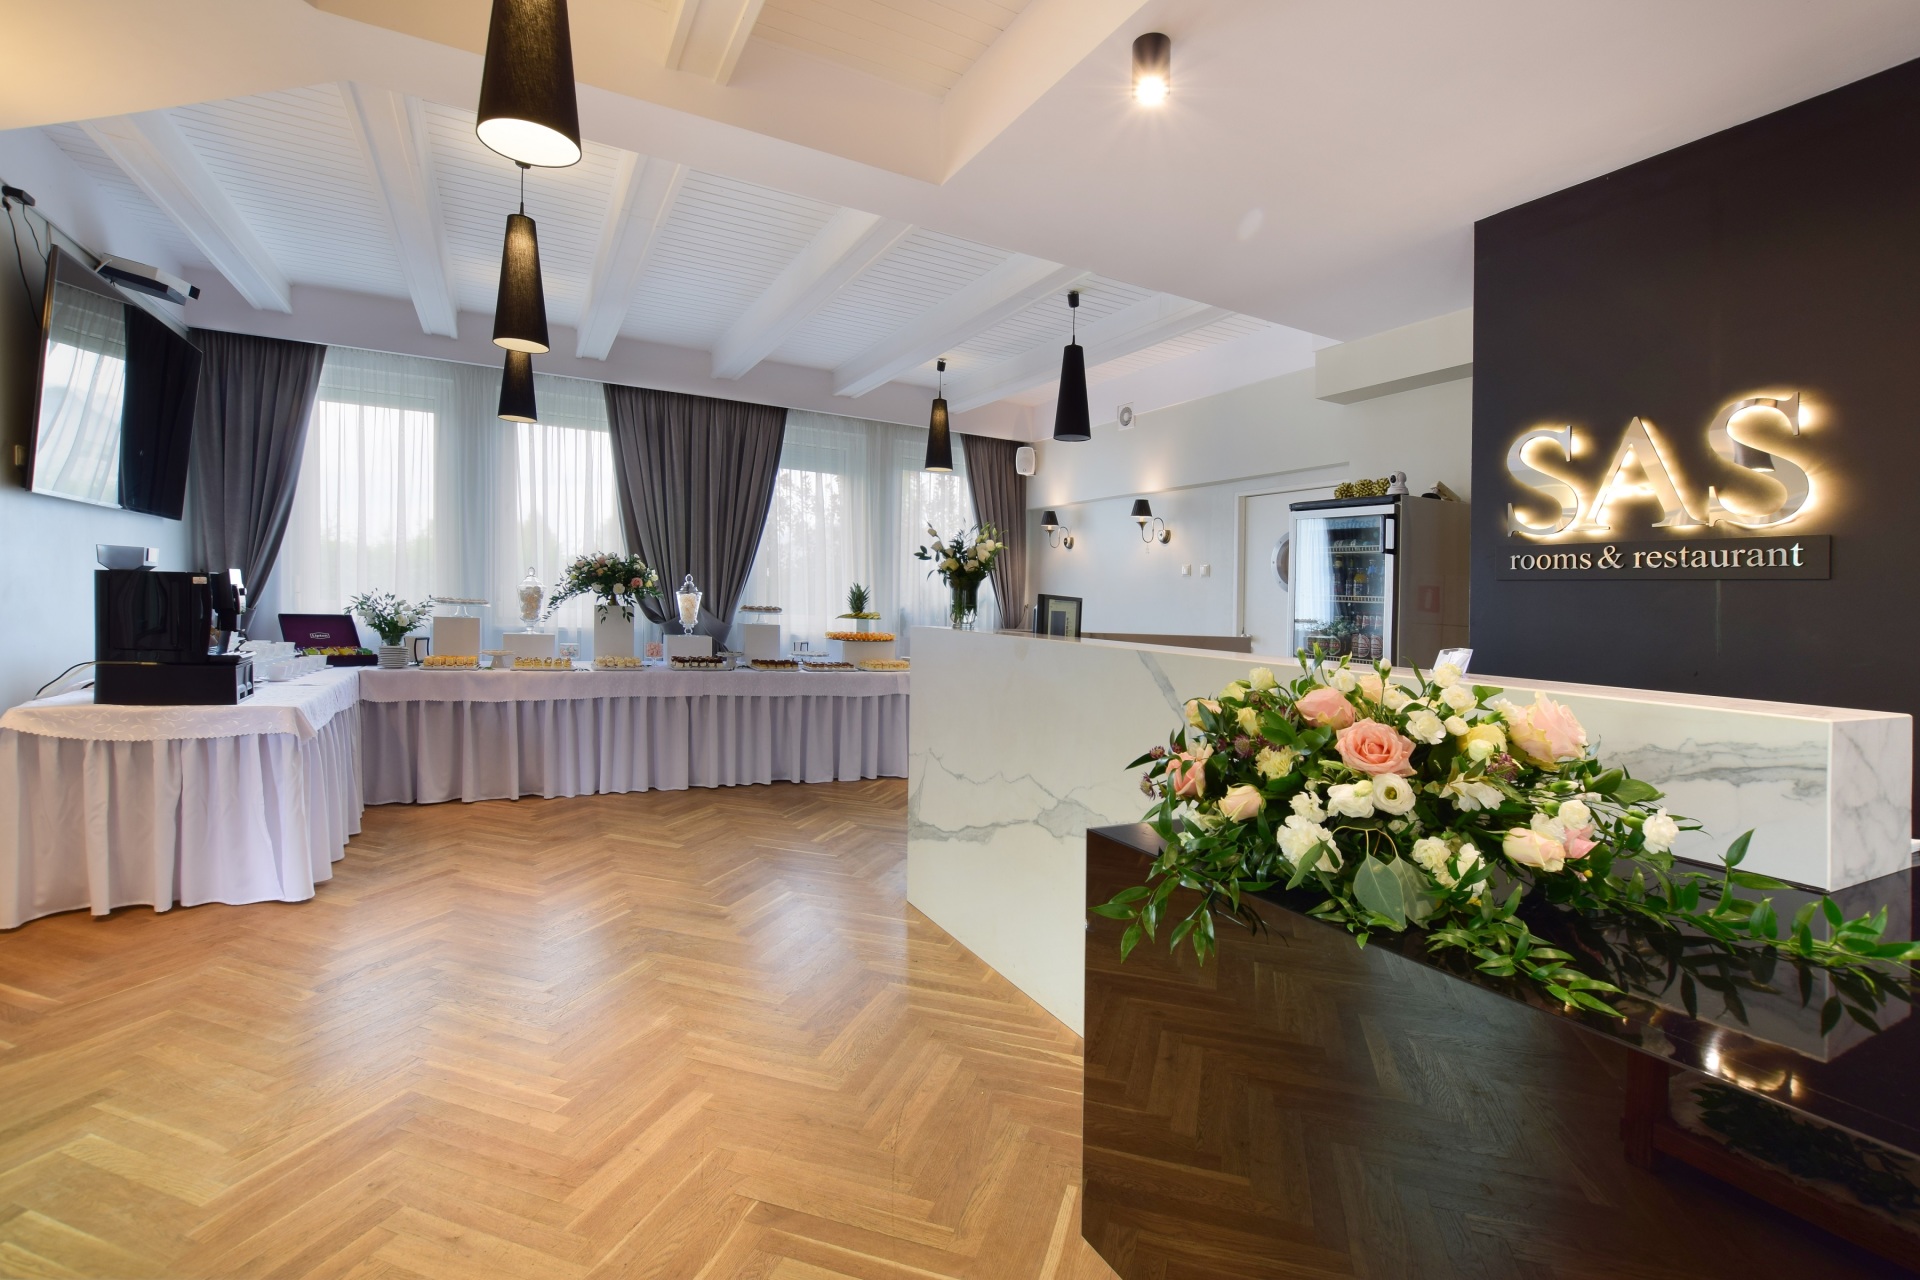 SAS rooms & restaurant | Sala weselna Lublin, lubelskie - cover